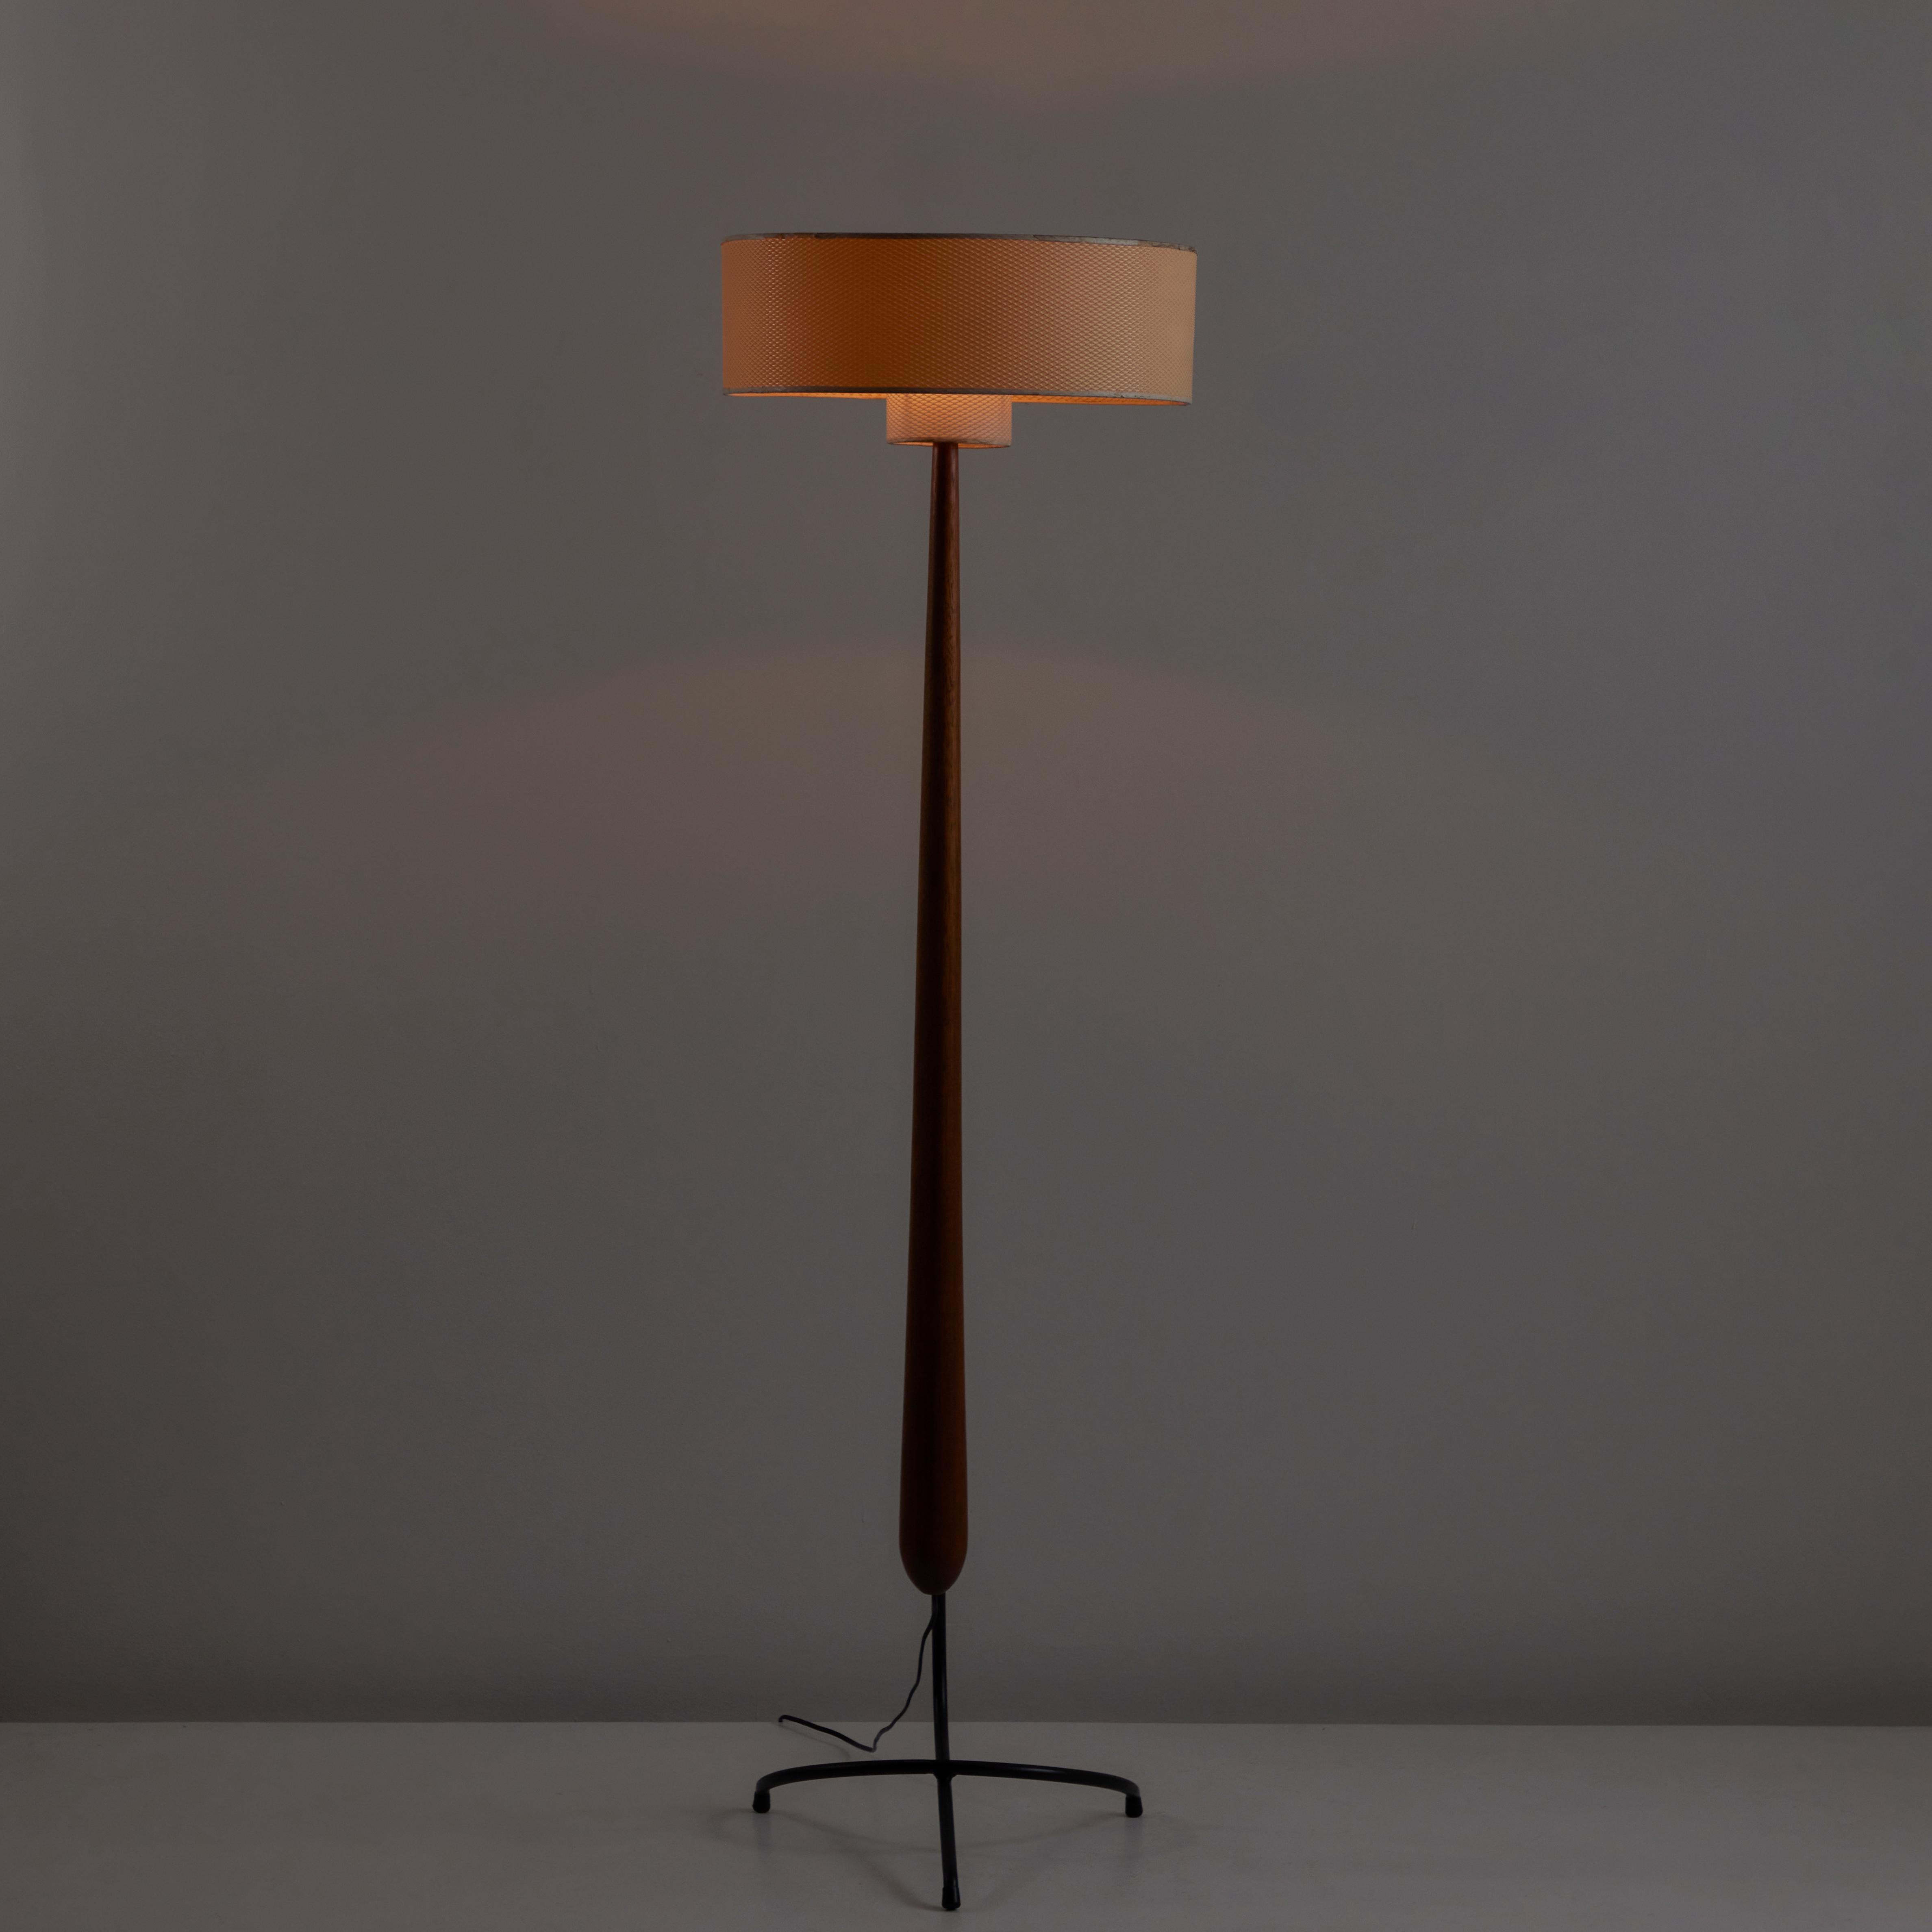 Rare Model 14.958 Floor Lamp by Rispal. Designed and manufactured in France, circa 1950. Rare sculptural floor lamp with slender custom wood stem, interlocking curved steel base, and double layered textured parchment shade. The floor lamp holds one